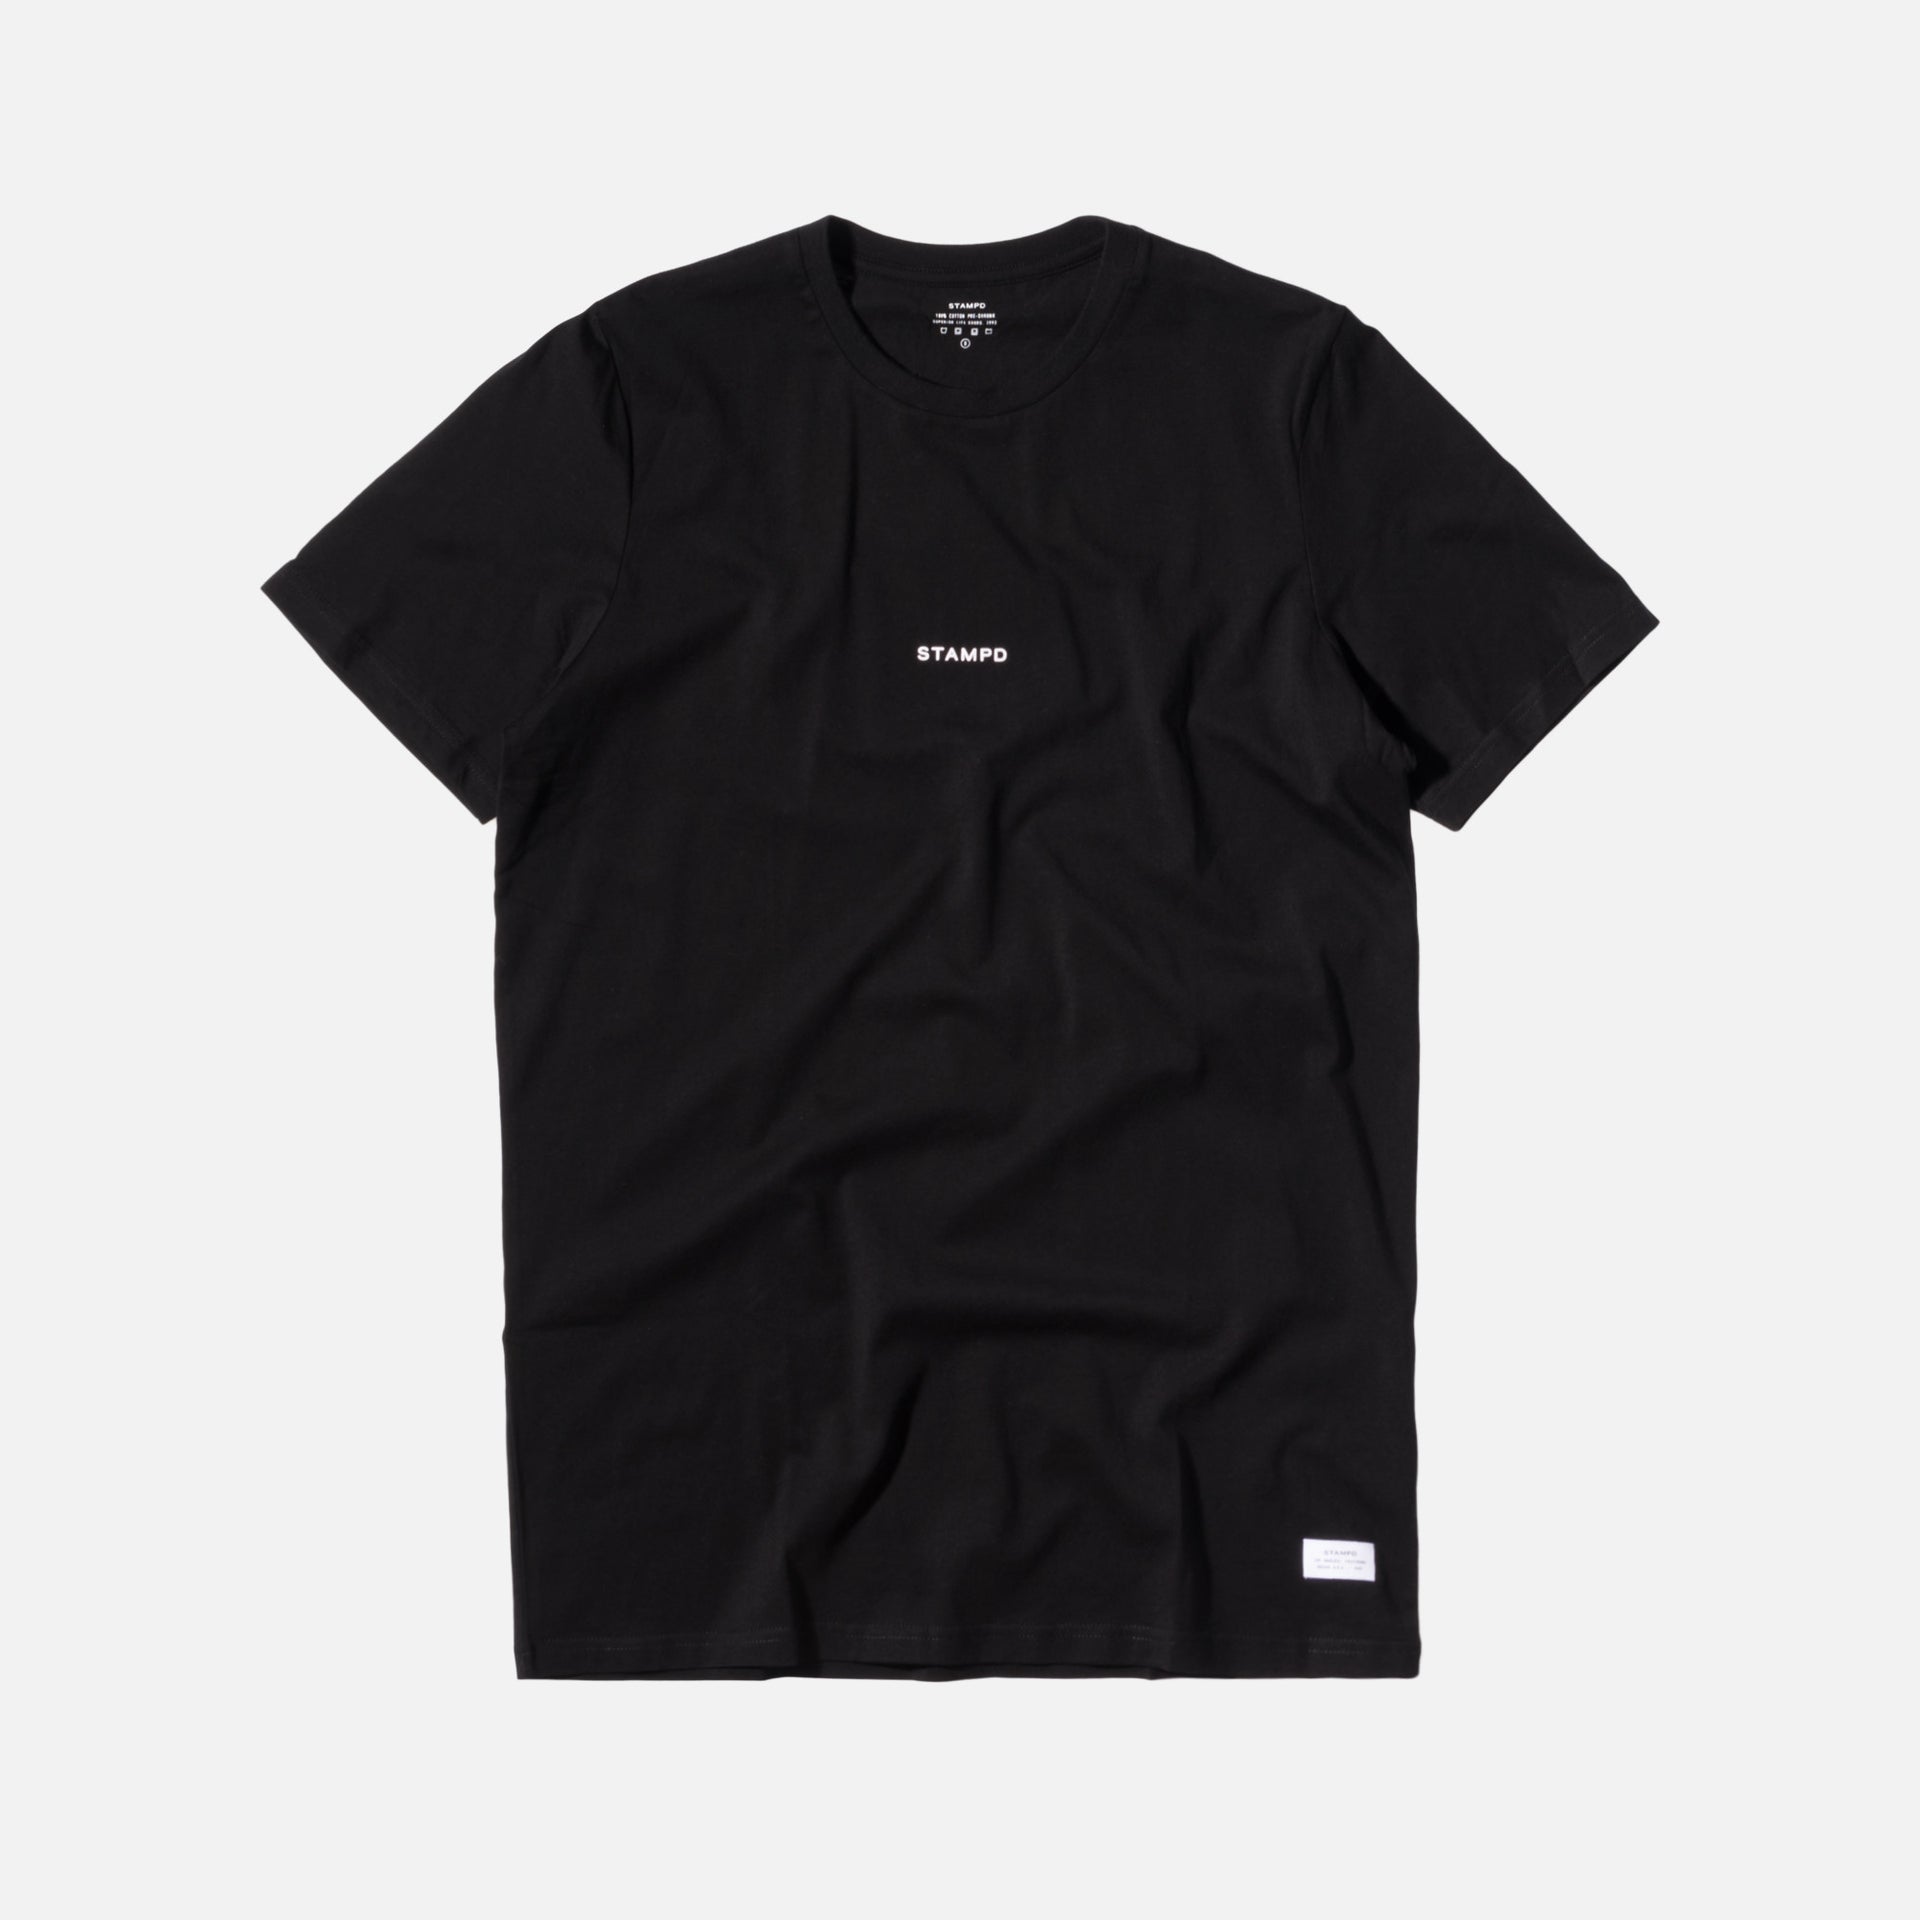 Stampd Stacked Tee - Black